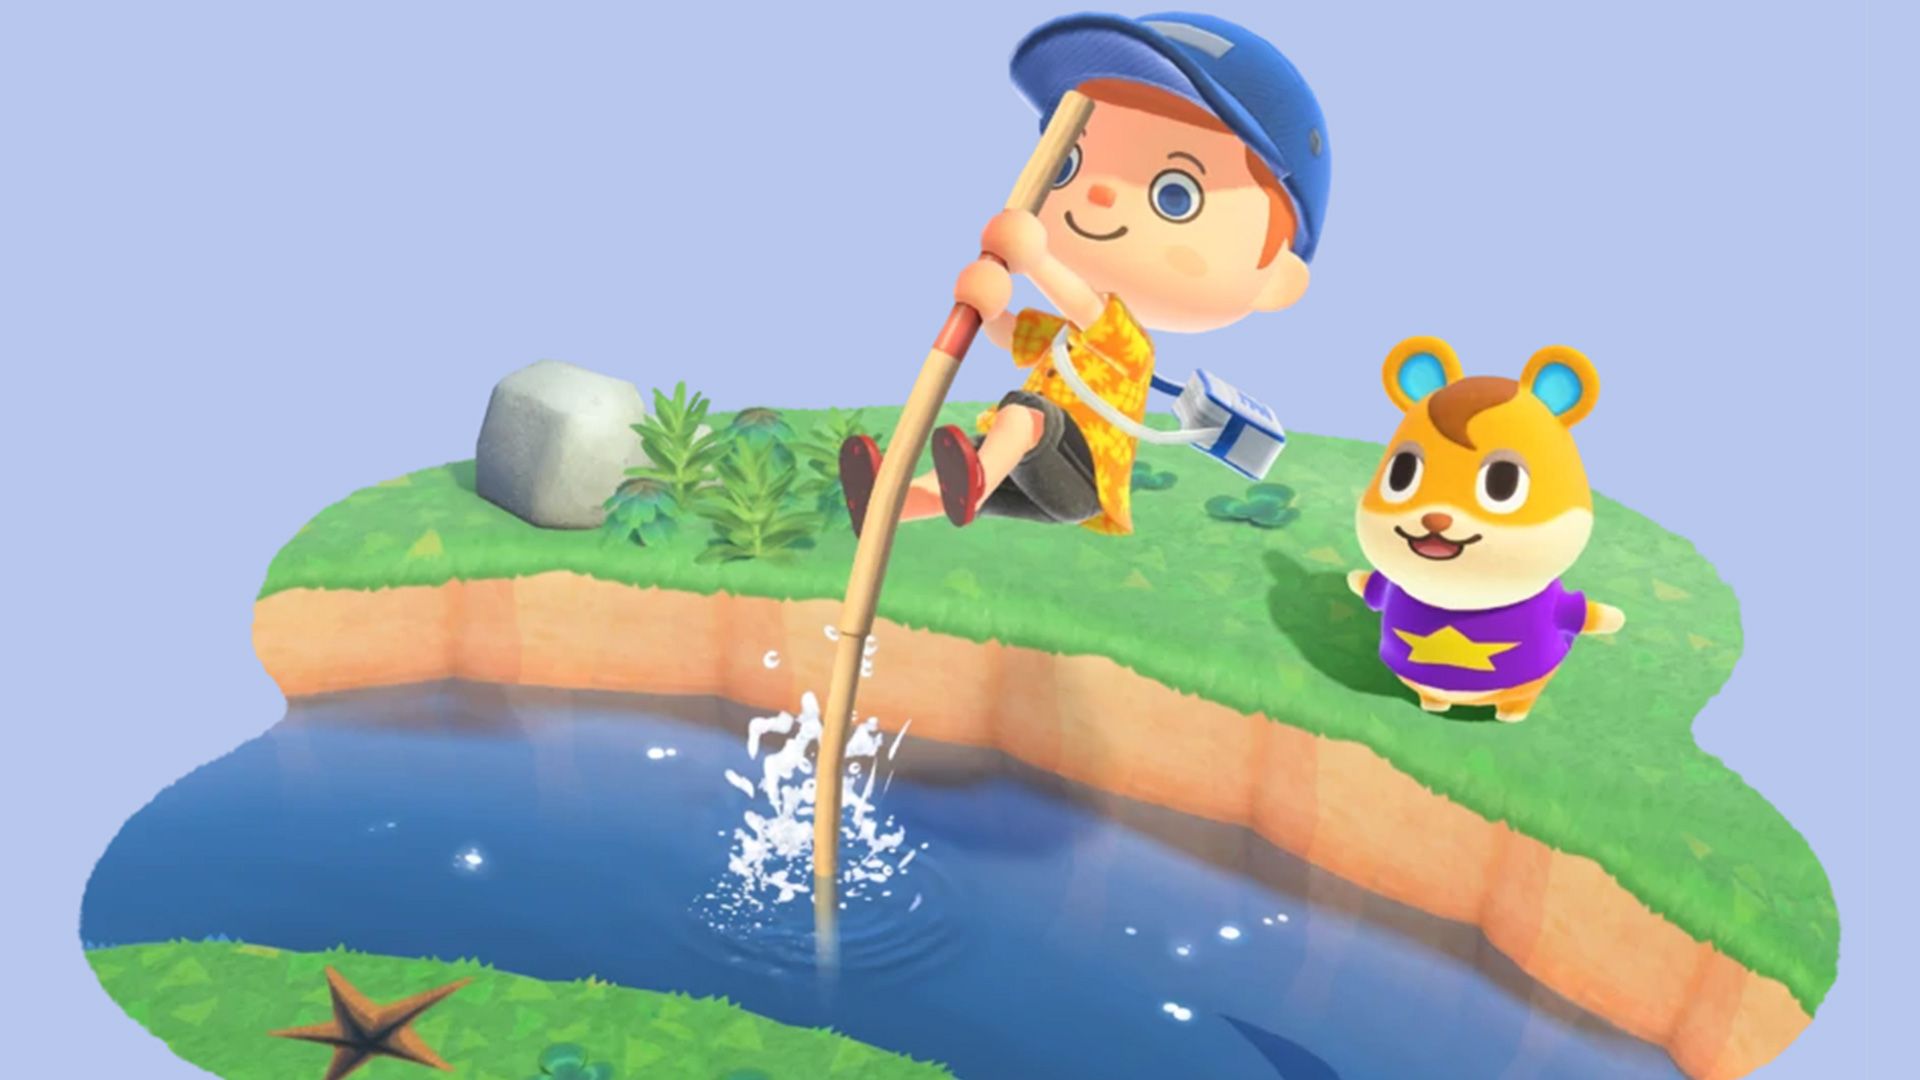 New Animal Crossing: New Horizons renders released, showing off